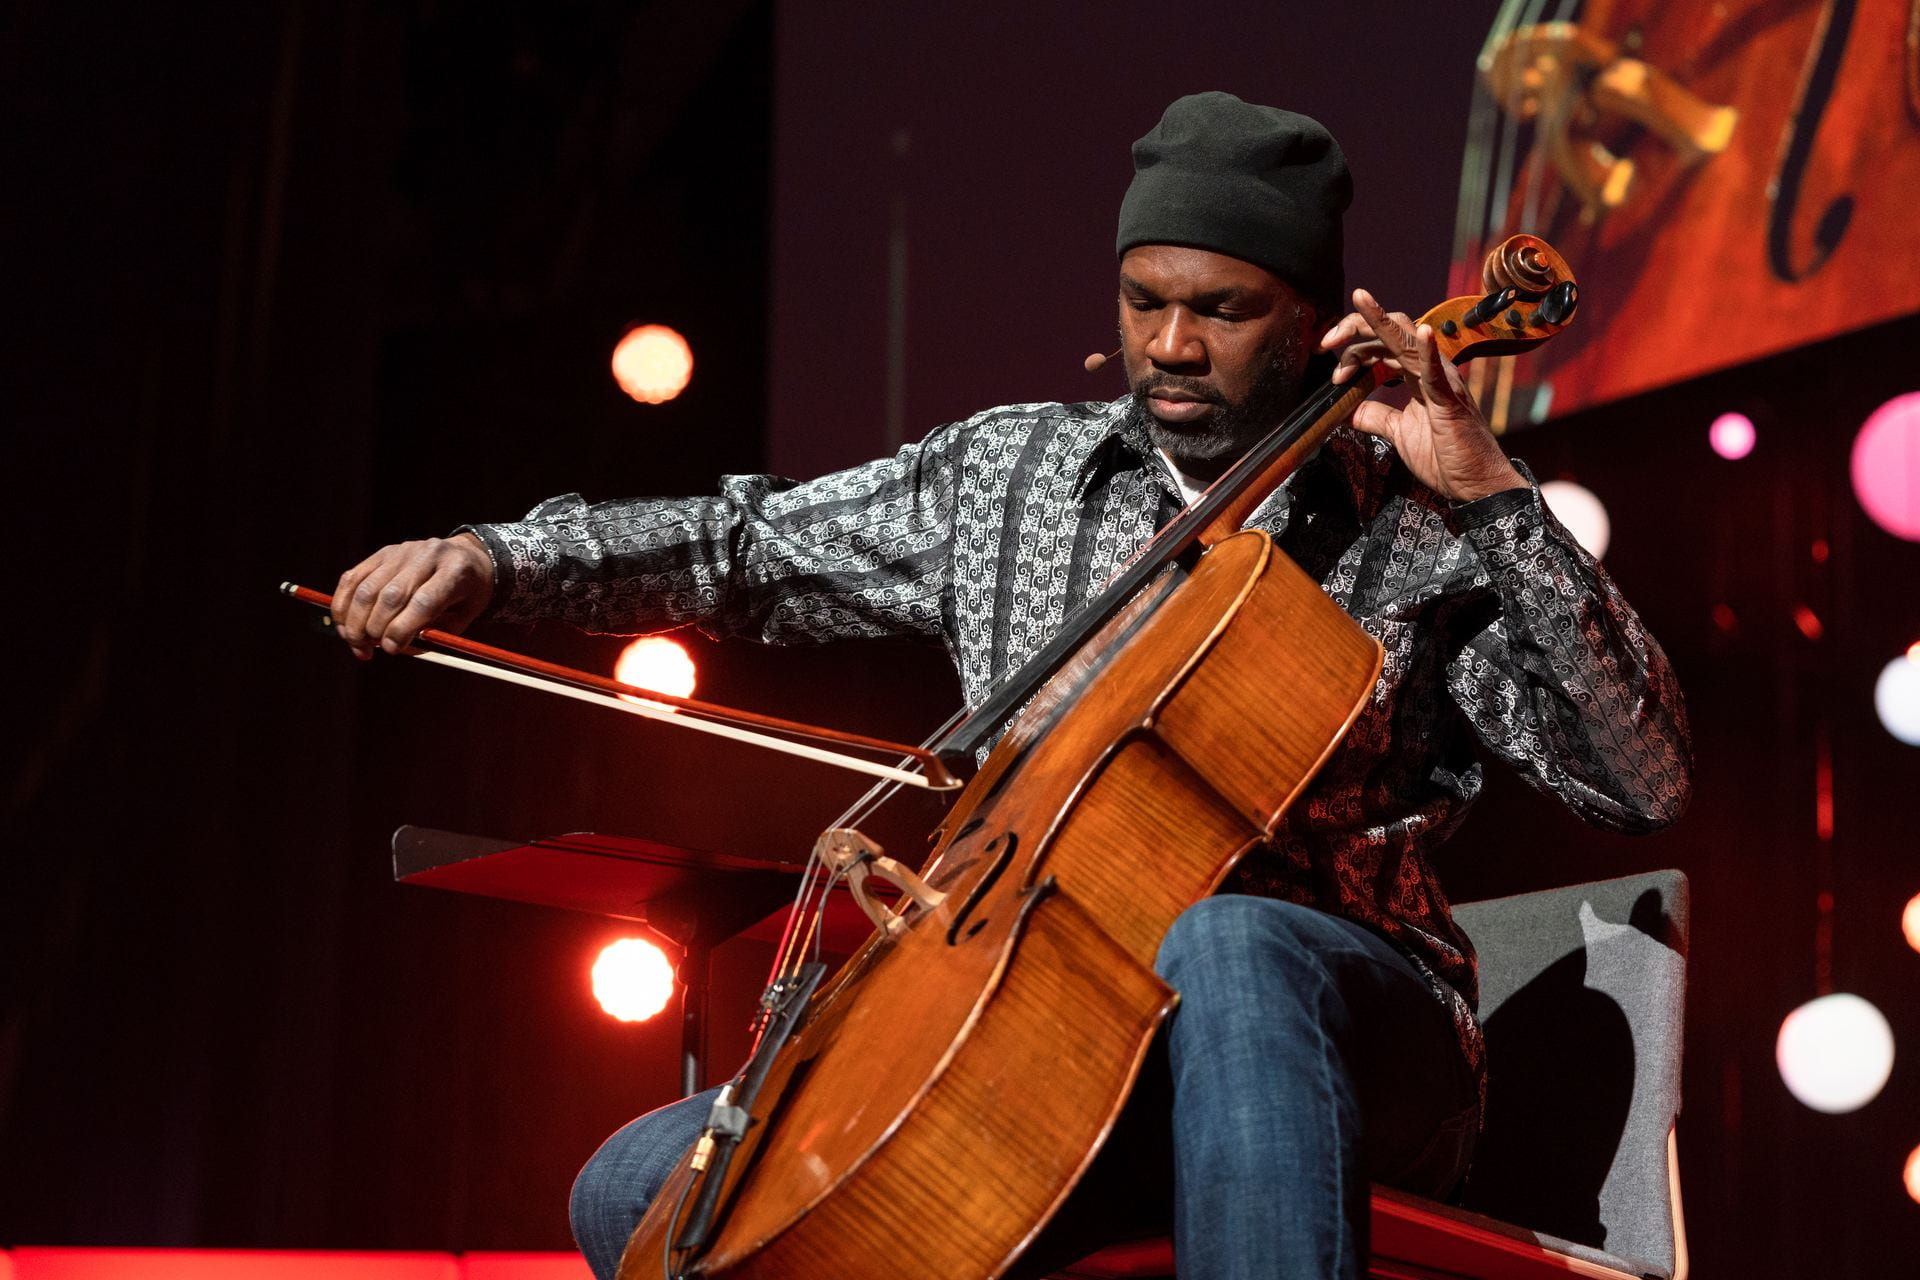 Paul Rucker playing cello. Photo by TED